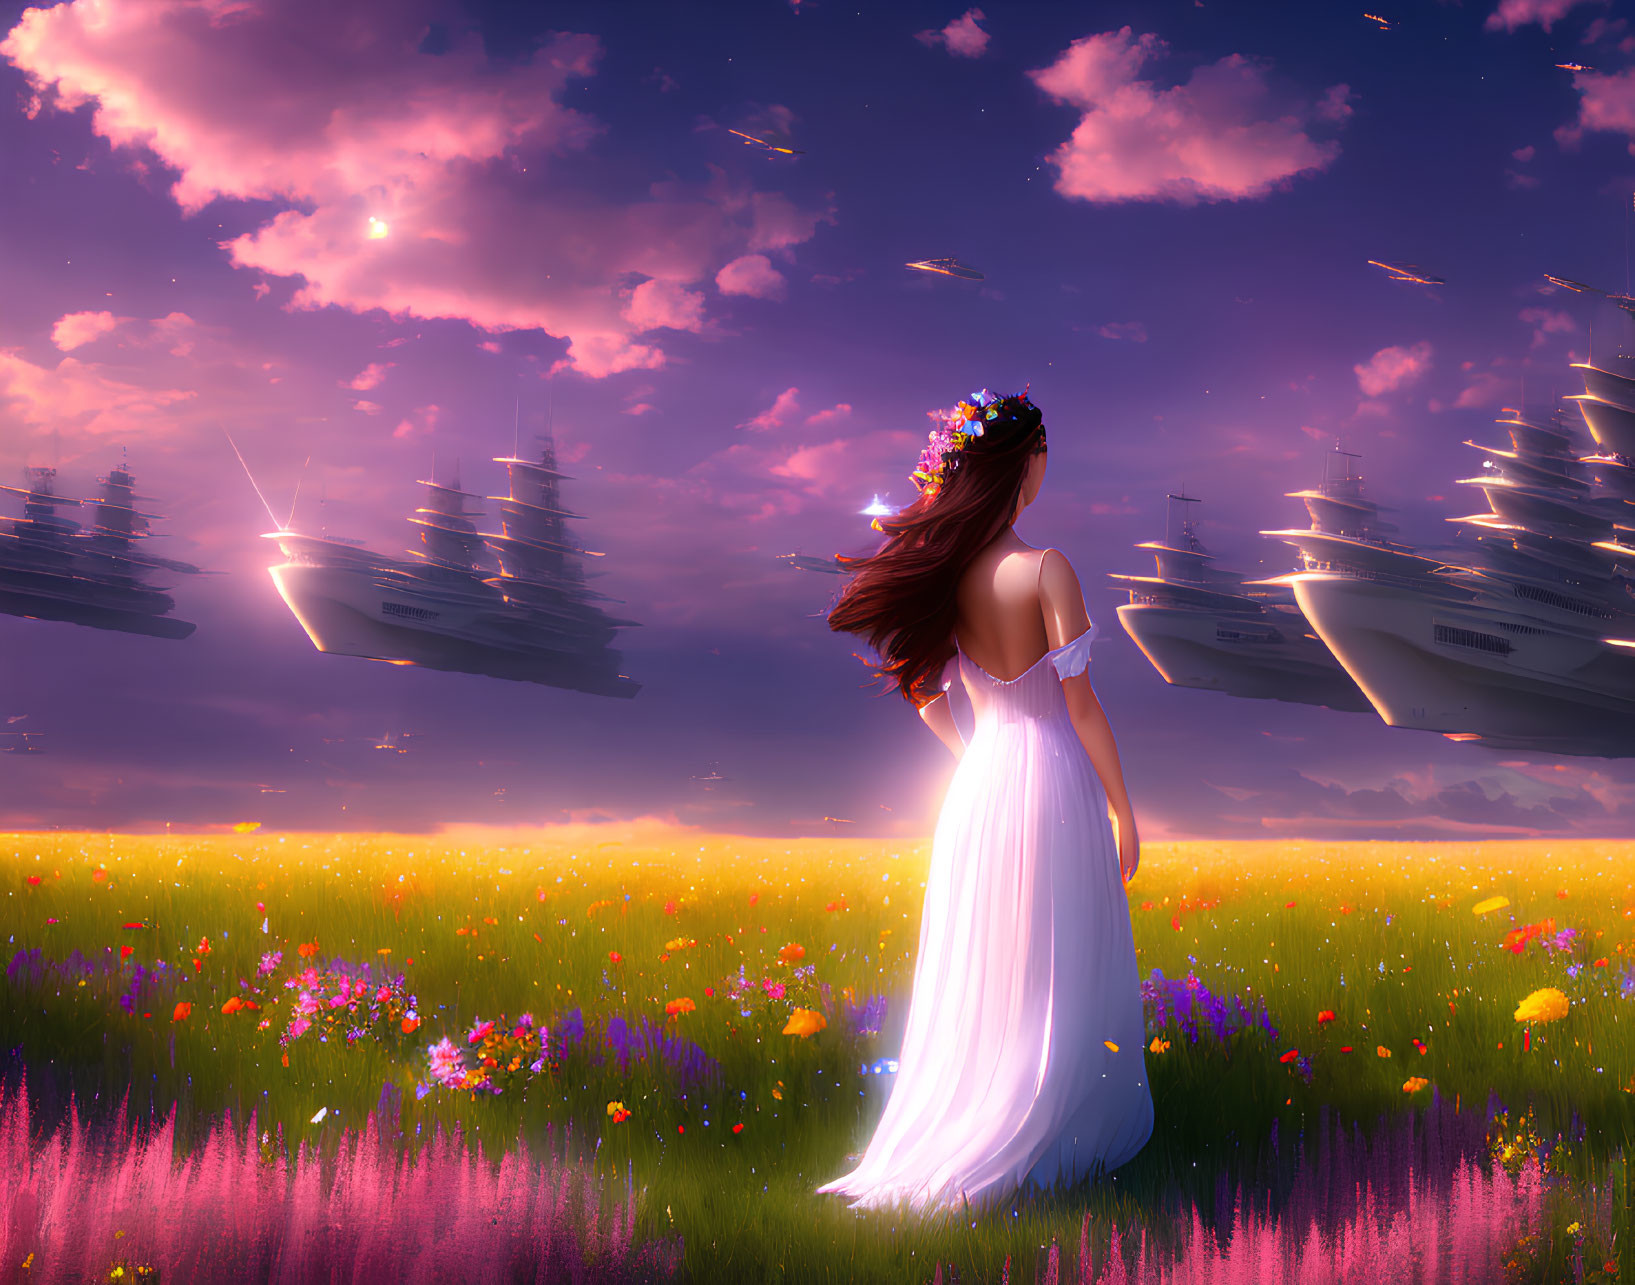 Woman in white dress and flower crown in vibrant field at sunset with shooting stars and floating islands.